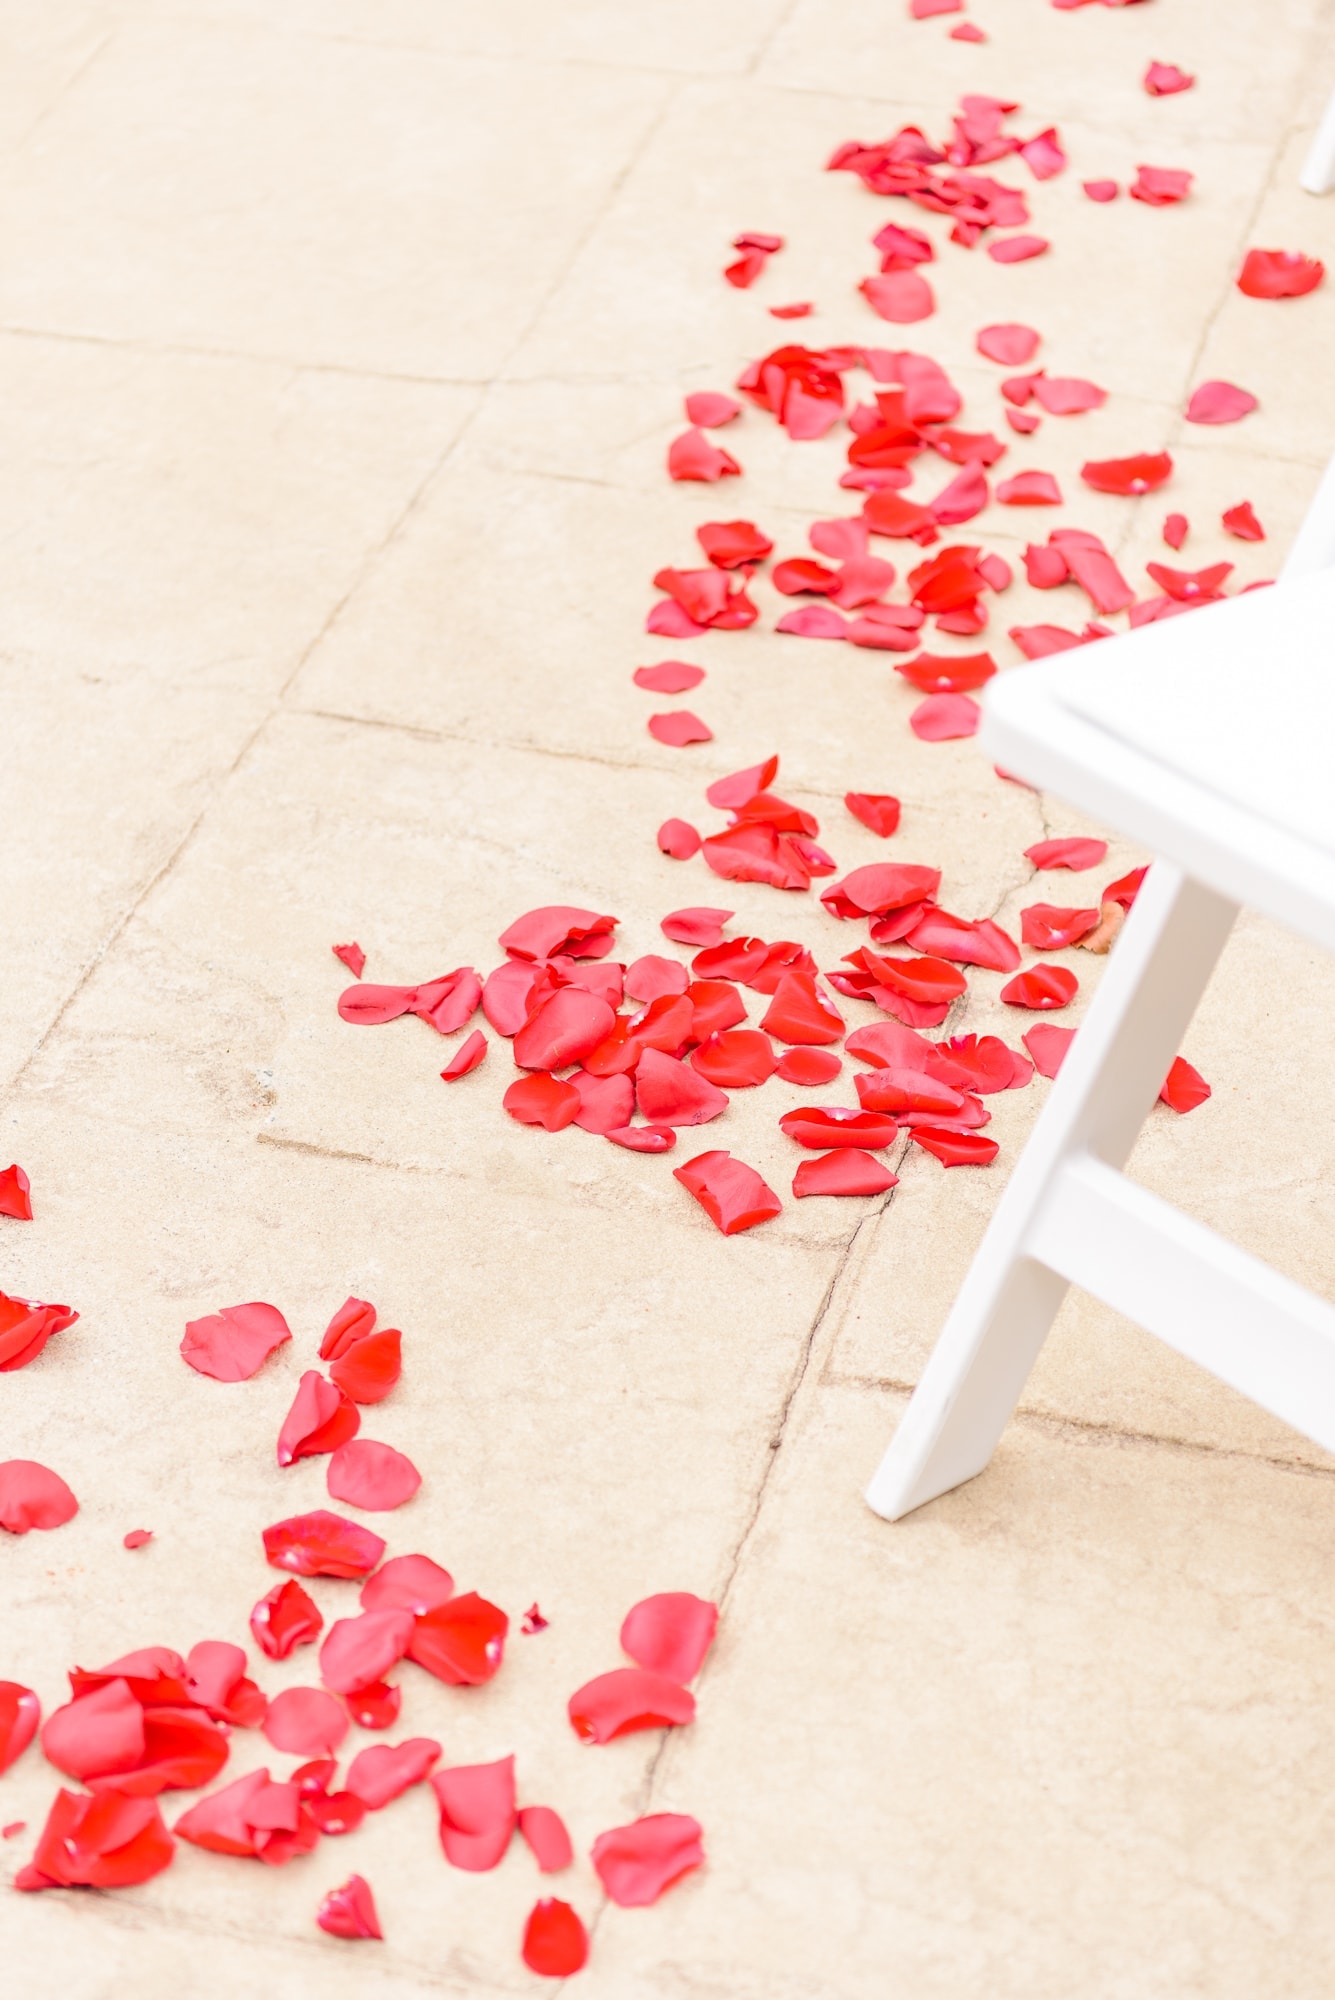 Rose petals adorn the aisle in the Charles Mack Citizen Center courtyard.